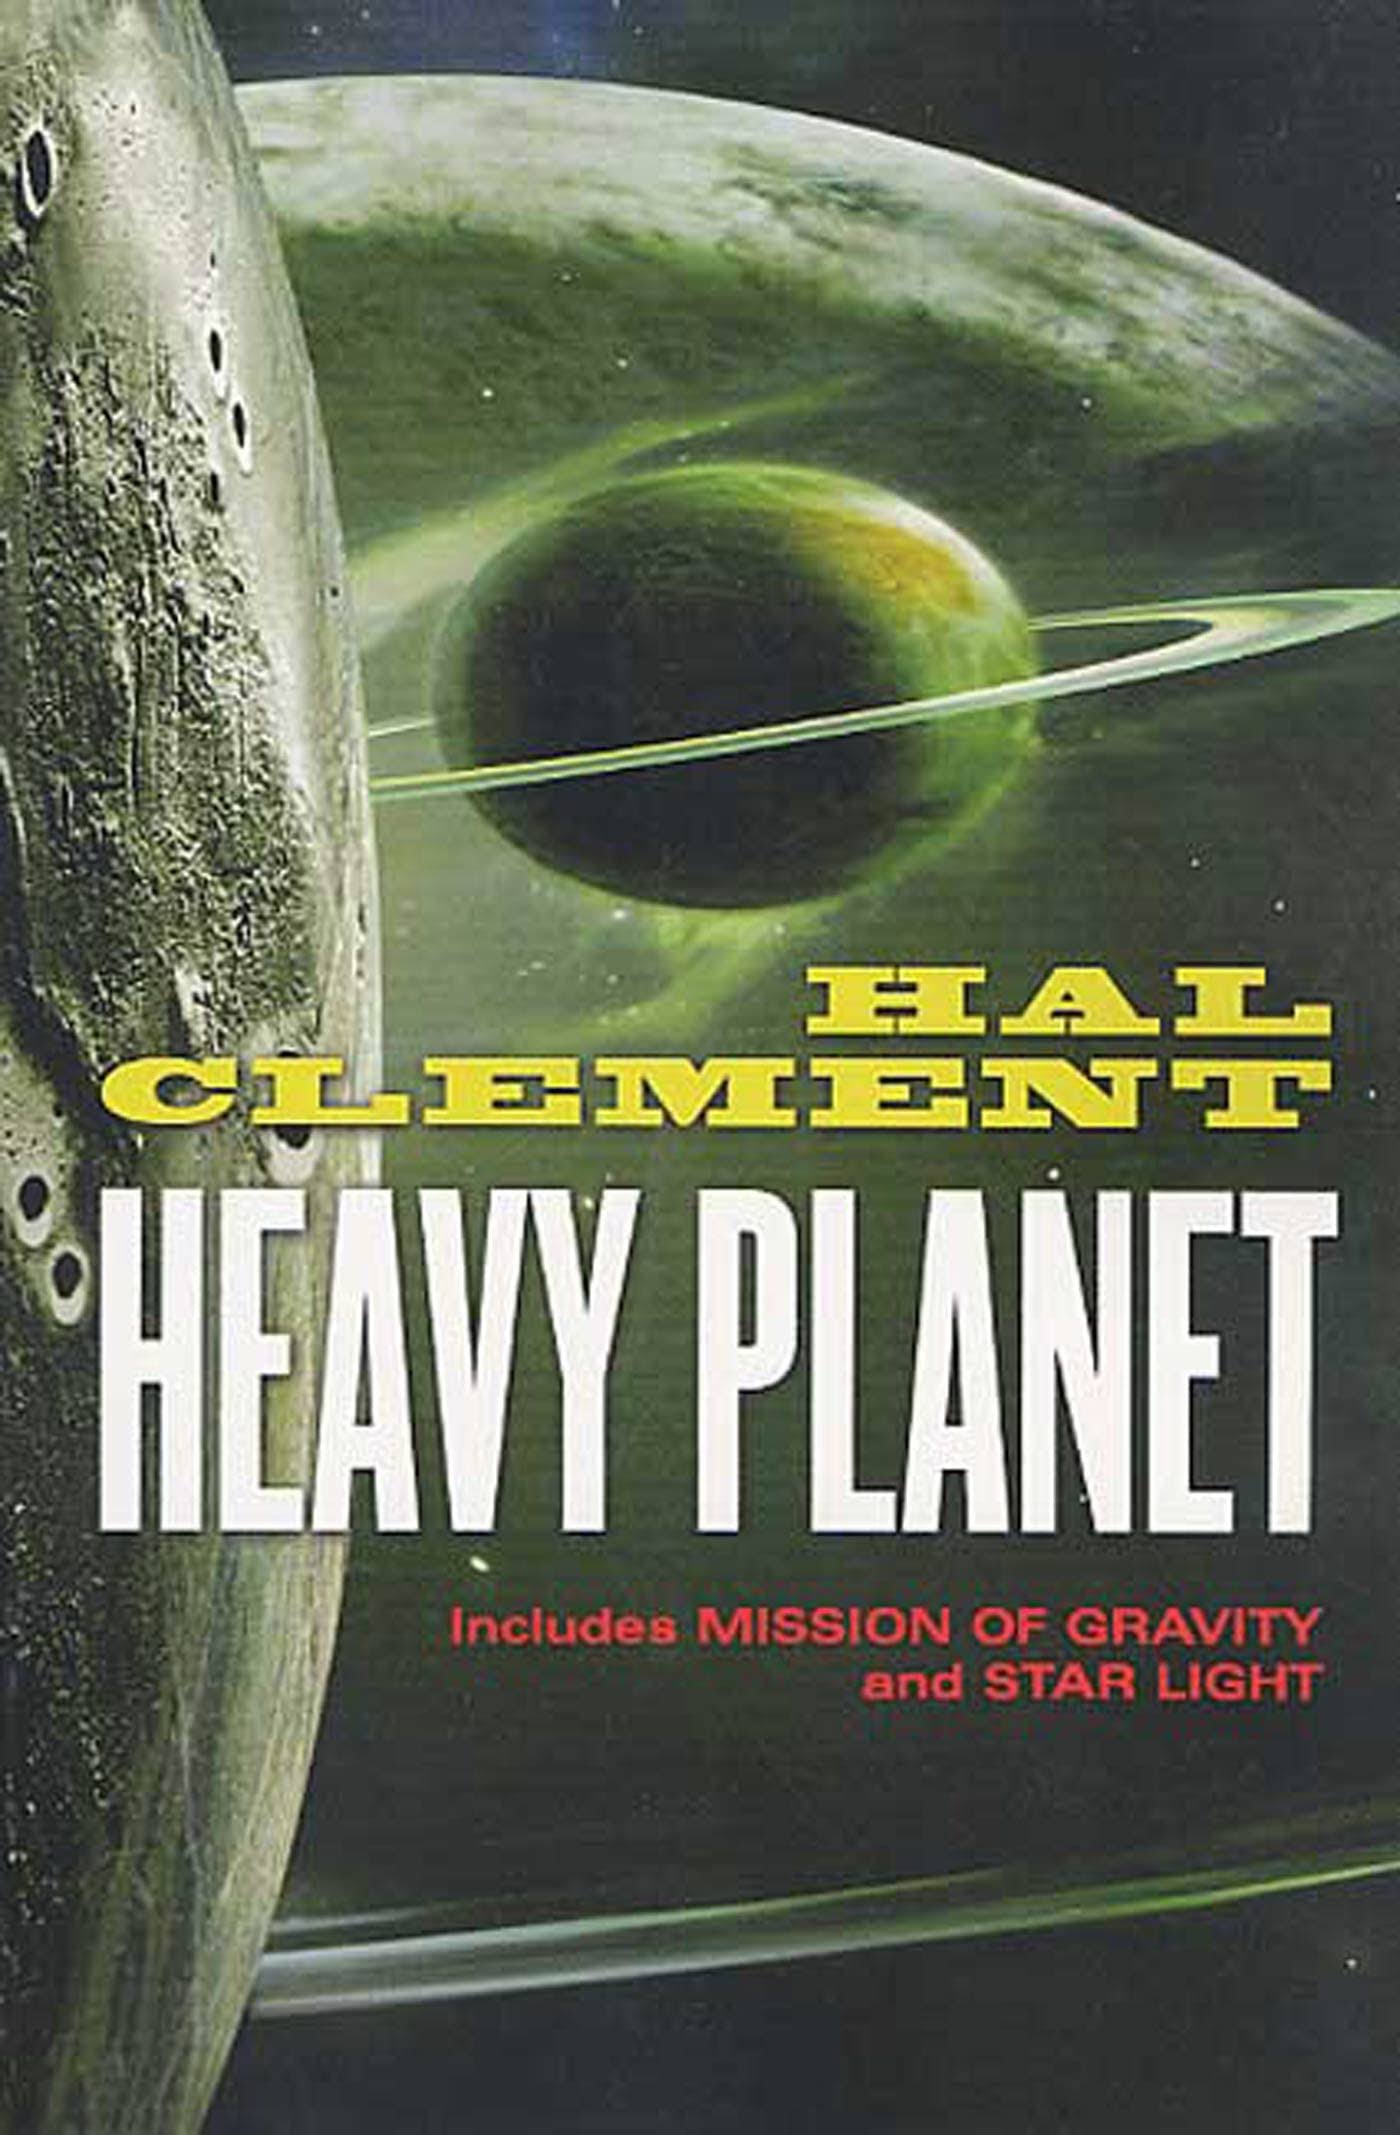 Heavy Planet : The Classic Mesklin Stories by Hal Clement - New - 076530368X